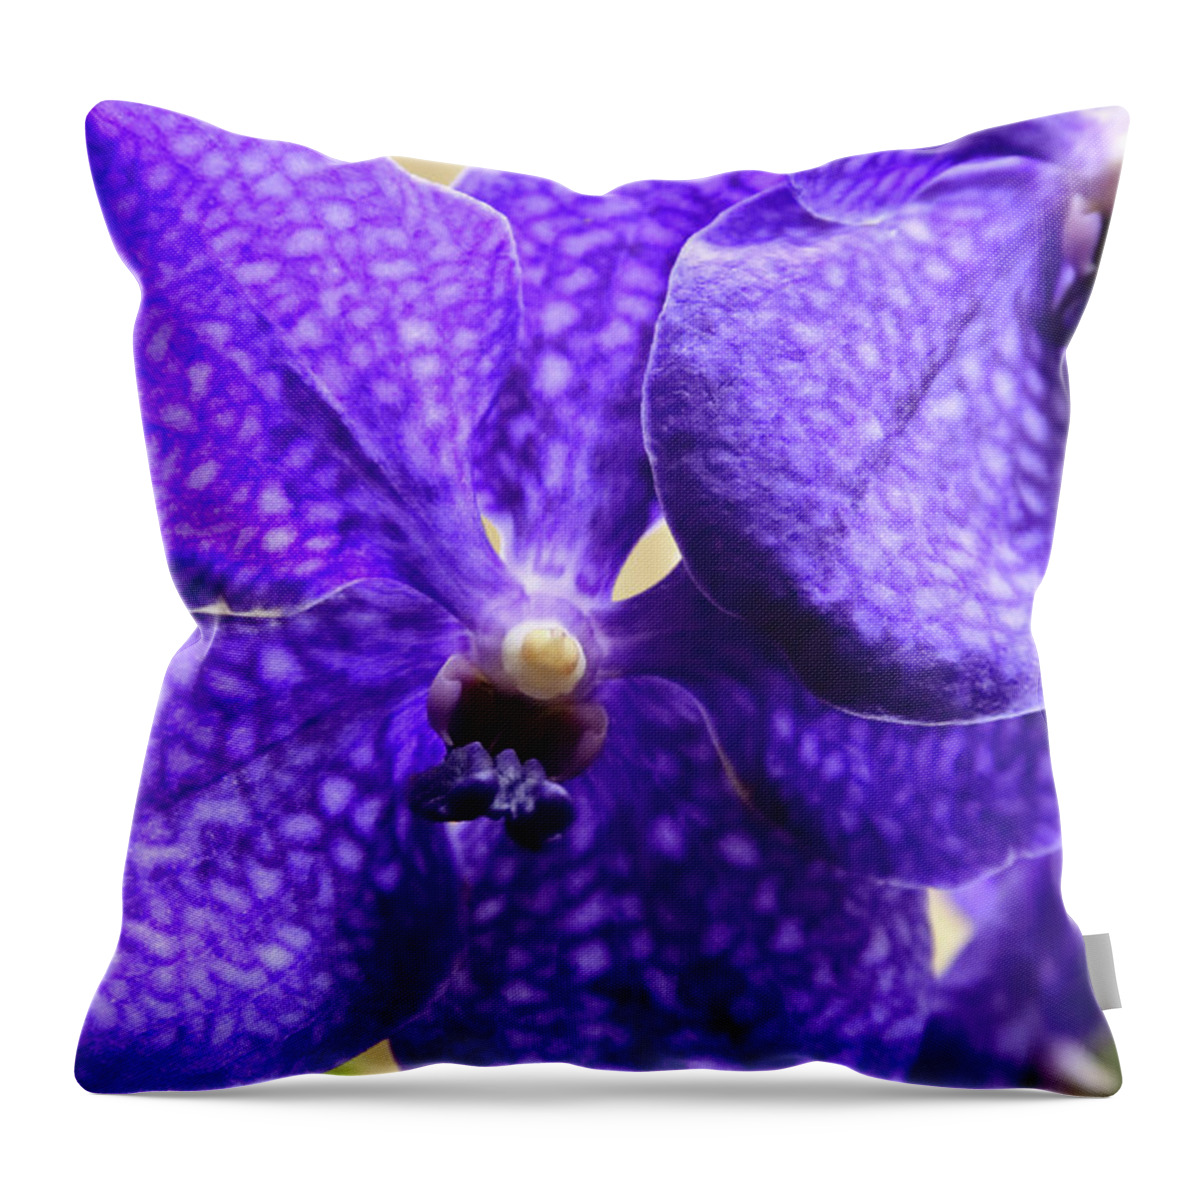 China Throw Pillow featuring the photograph Vanda Orchid Portrait II by Tanya Owens